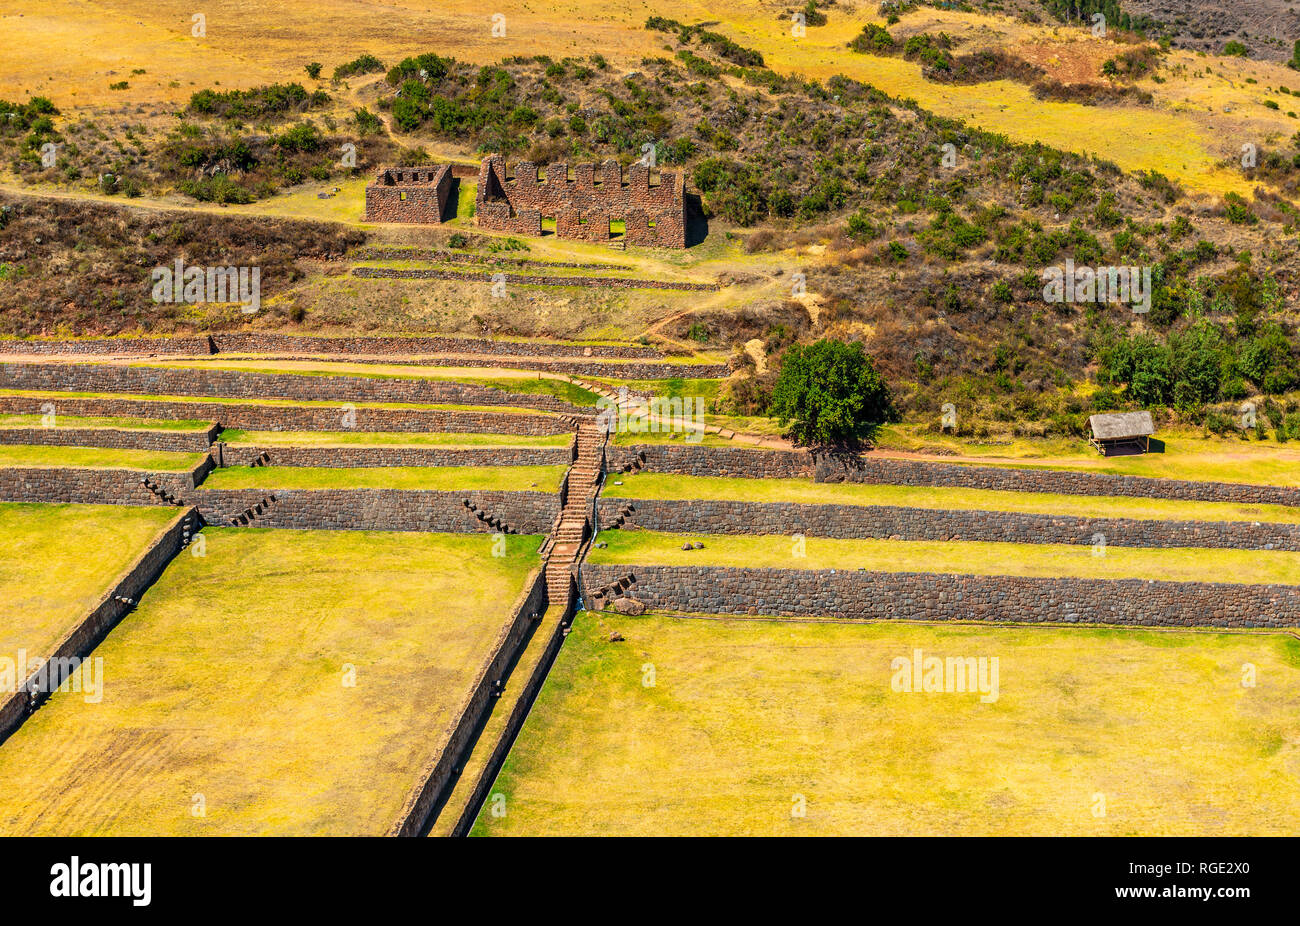 The Inca ruin and archaeological site of Tipon with its magnificent agriculture terraces in the Sacred Valley of the Inca near Cusco, Peru. Stock Photo